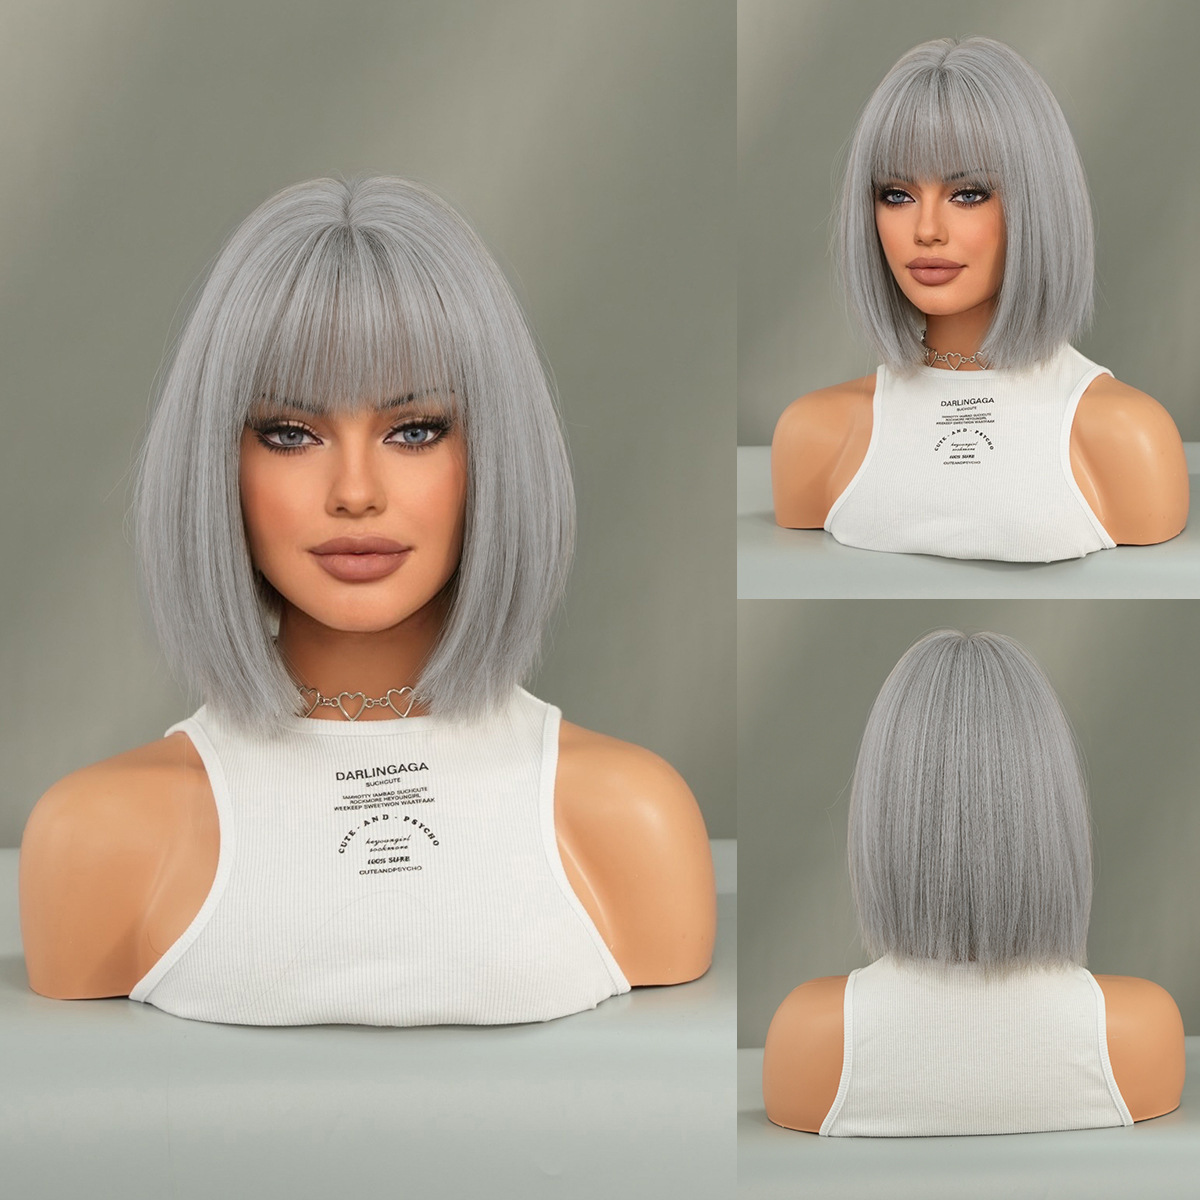 YAKI black bob wig made of synthetic hair, featuring short straight hair and bangs, ready to wear